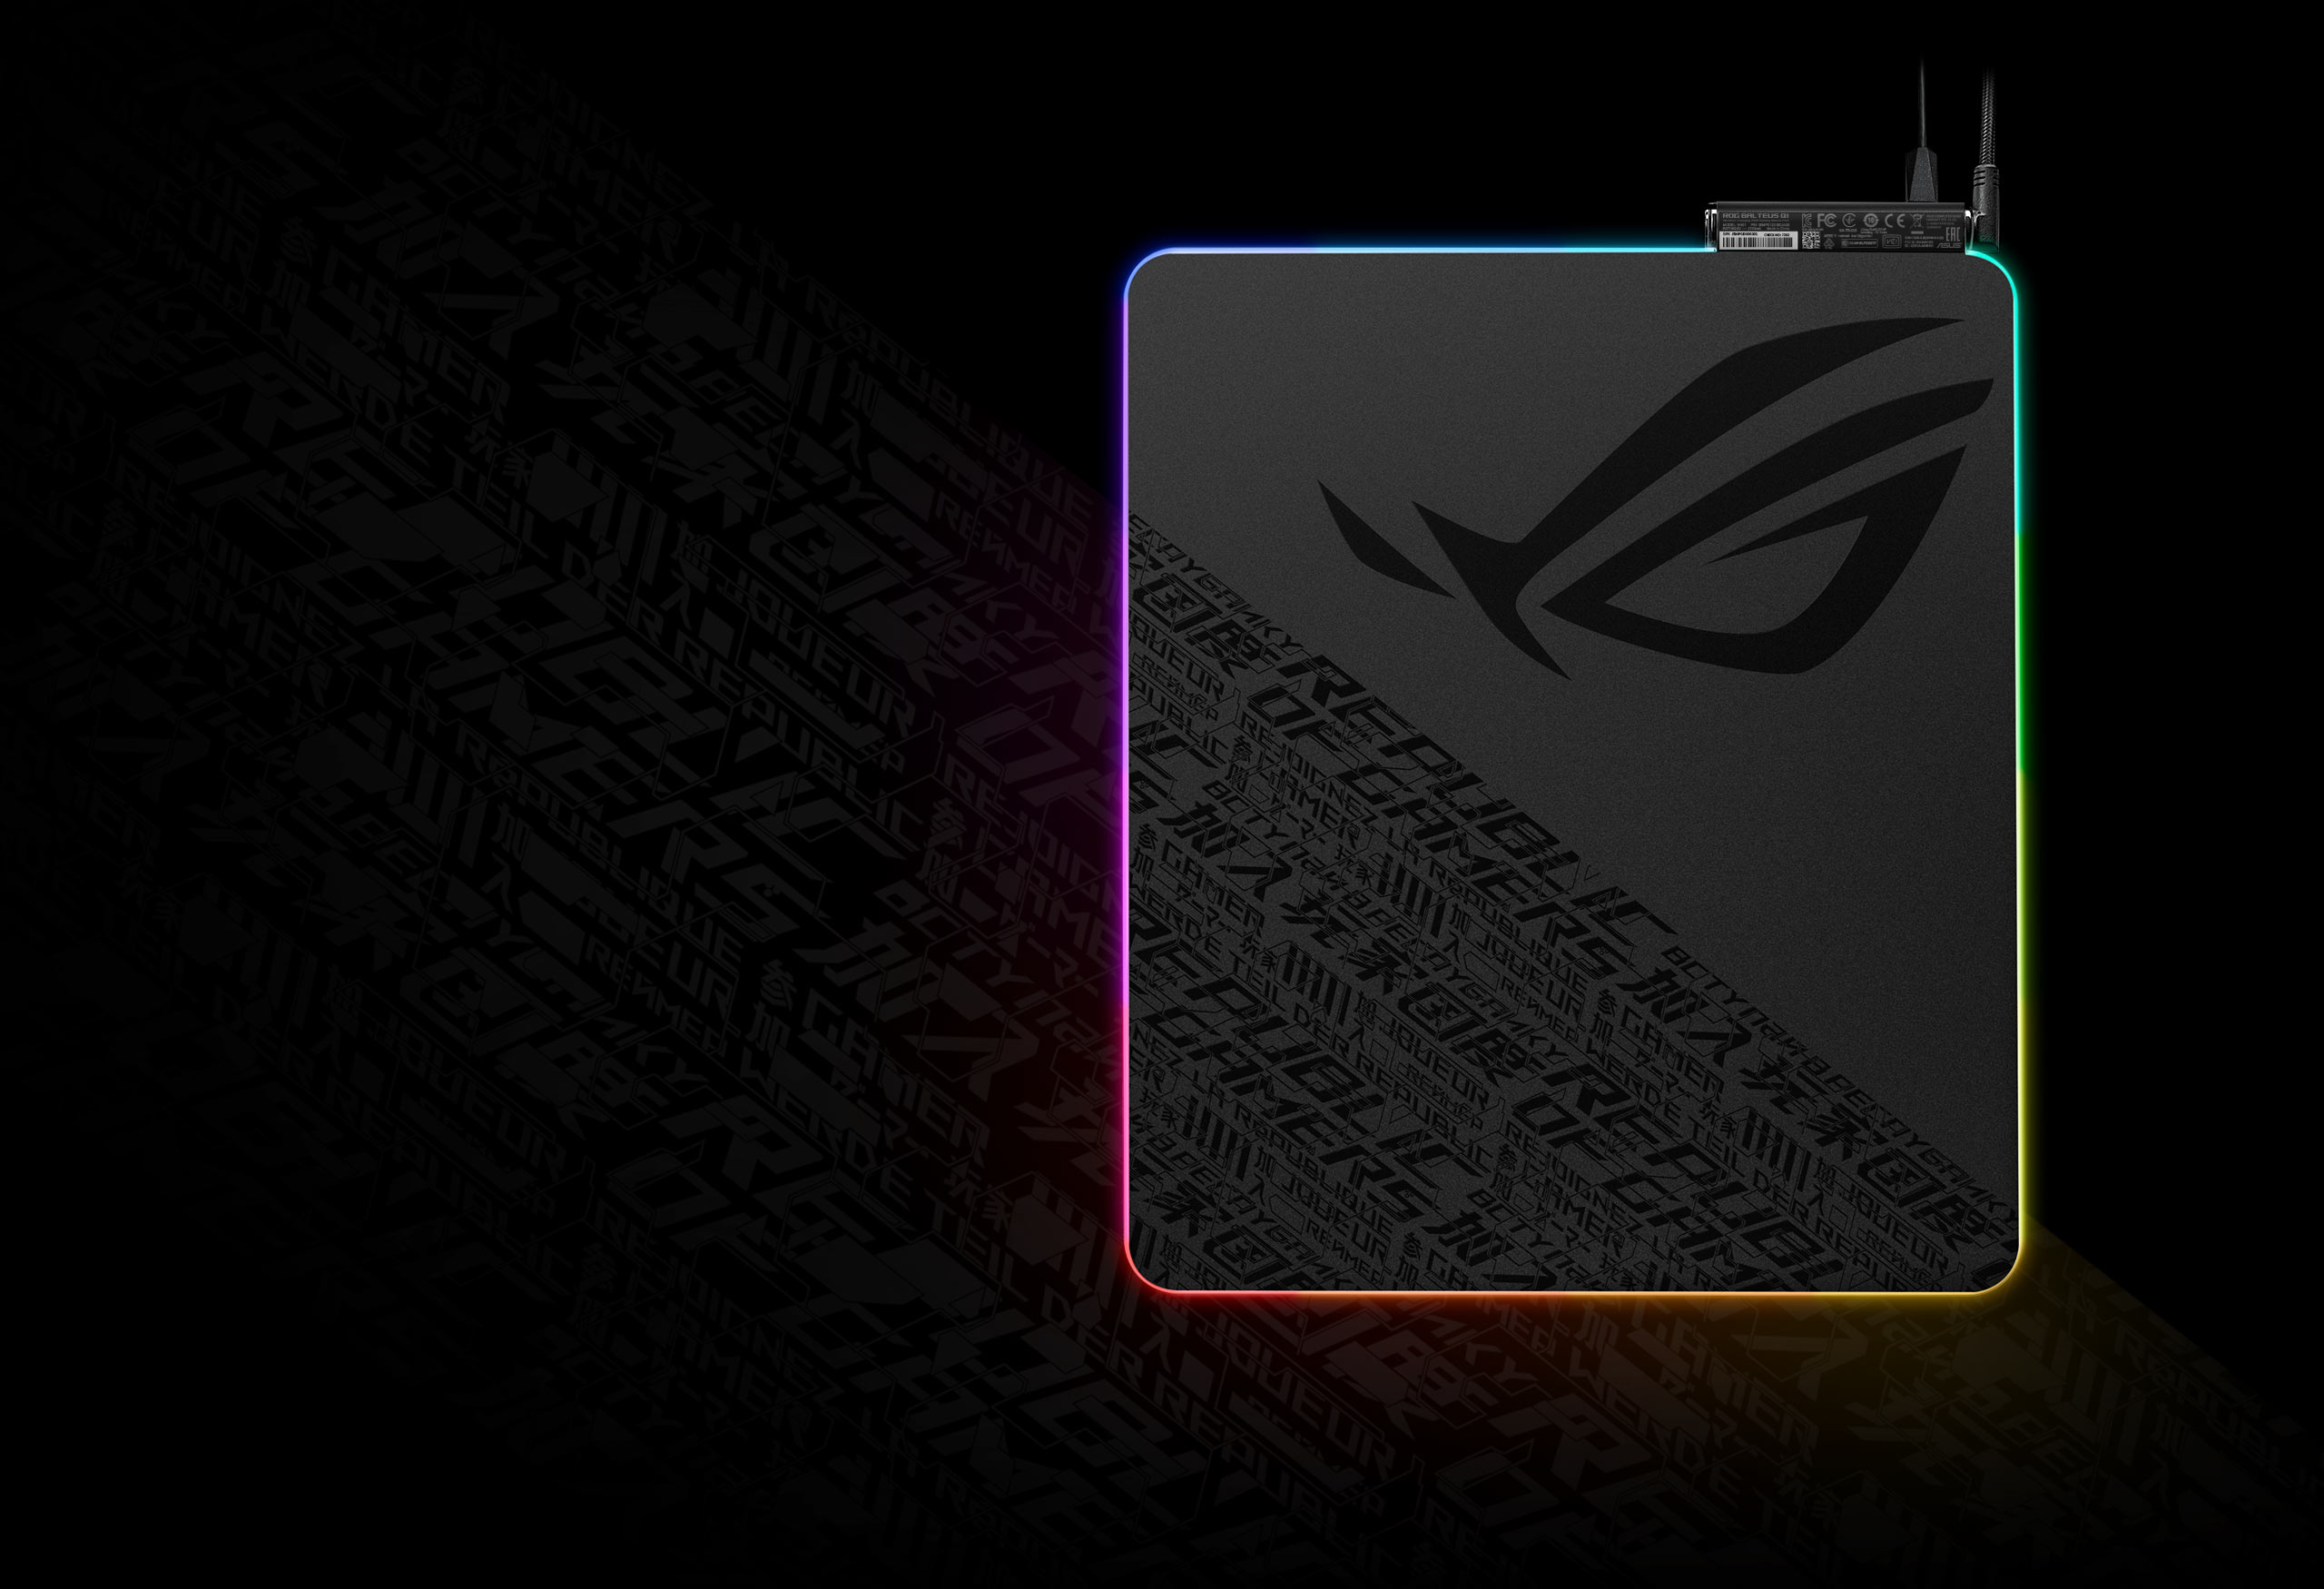 Image of ROG Balteus Qi to show the ROG markings on its nonslip rubber base